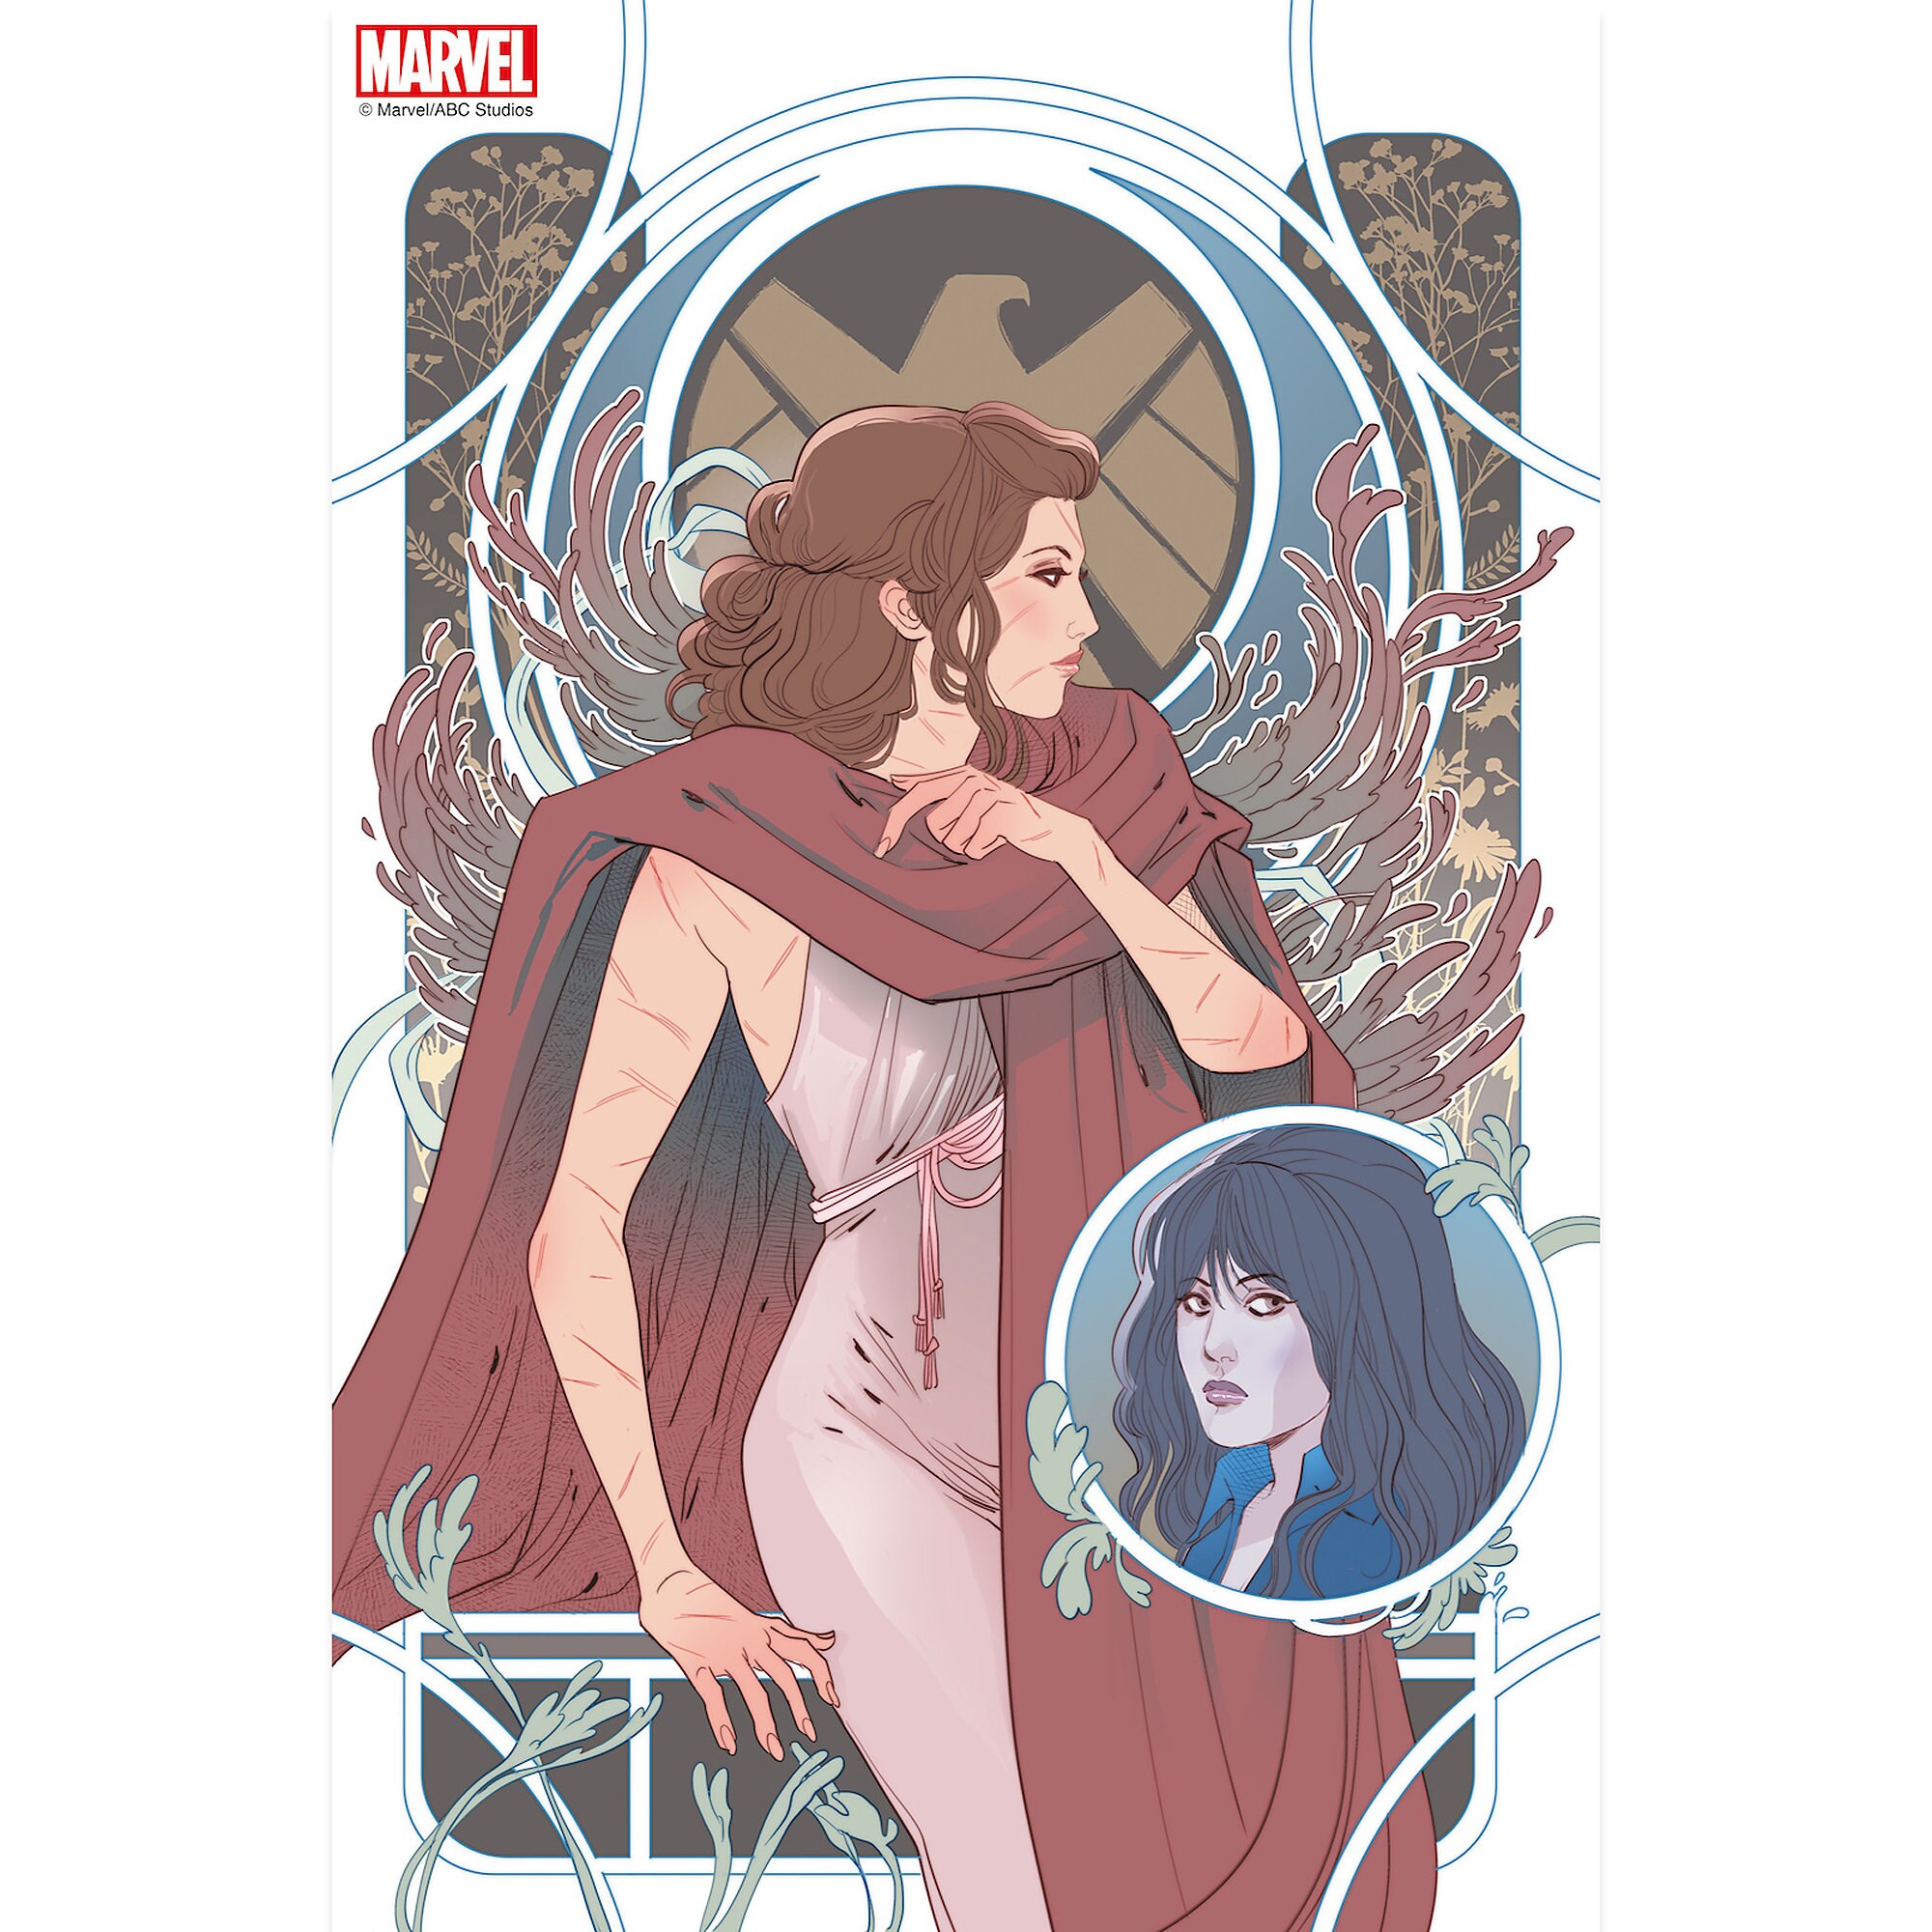 Marvel's Agents of S.H.I.E.L.D. ''Scars'' Print - Limited Edition